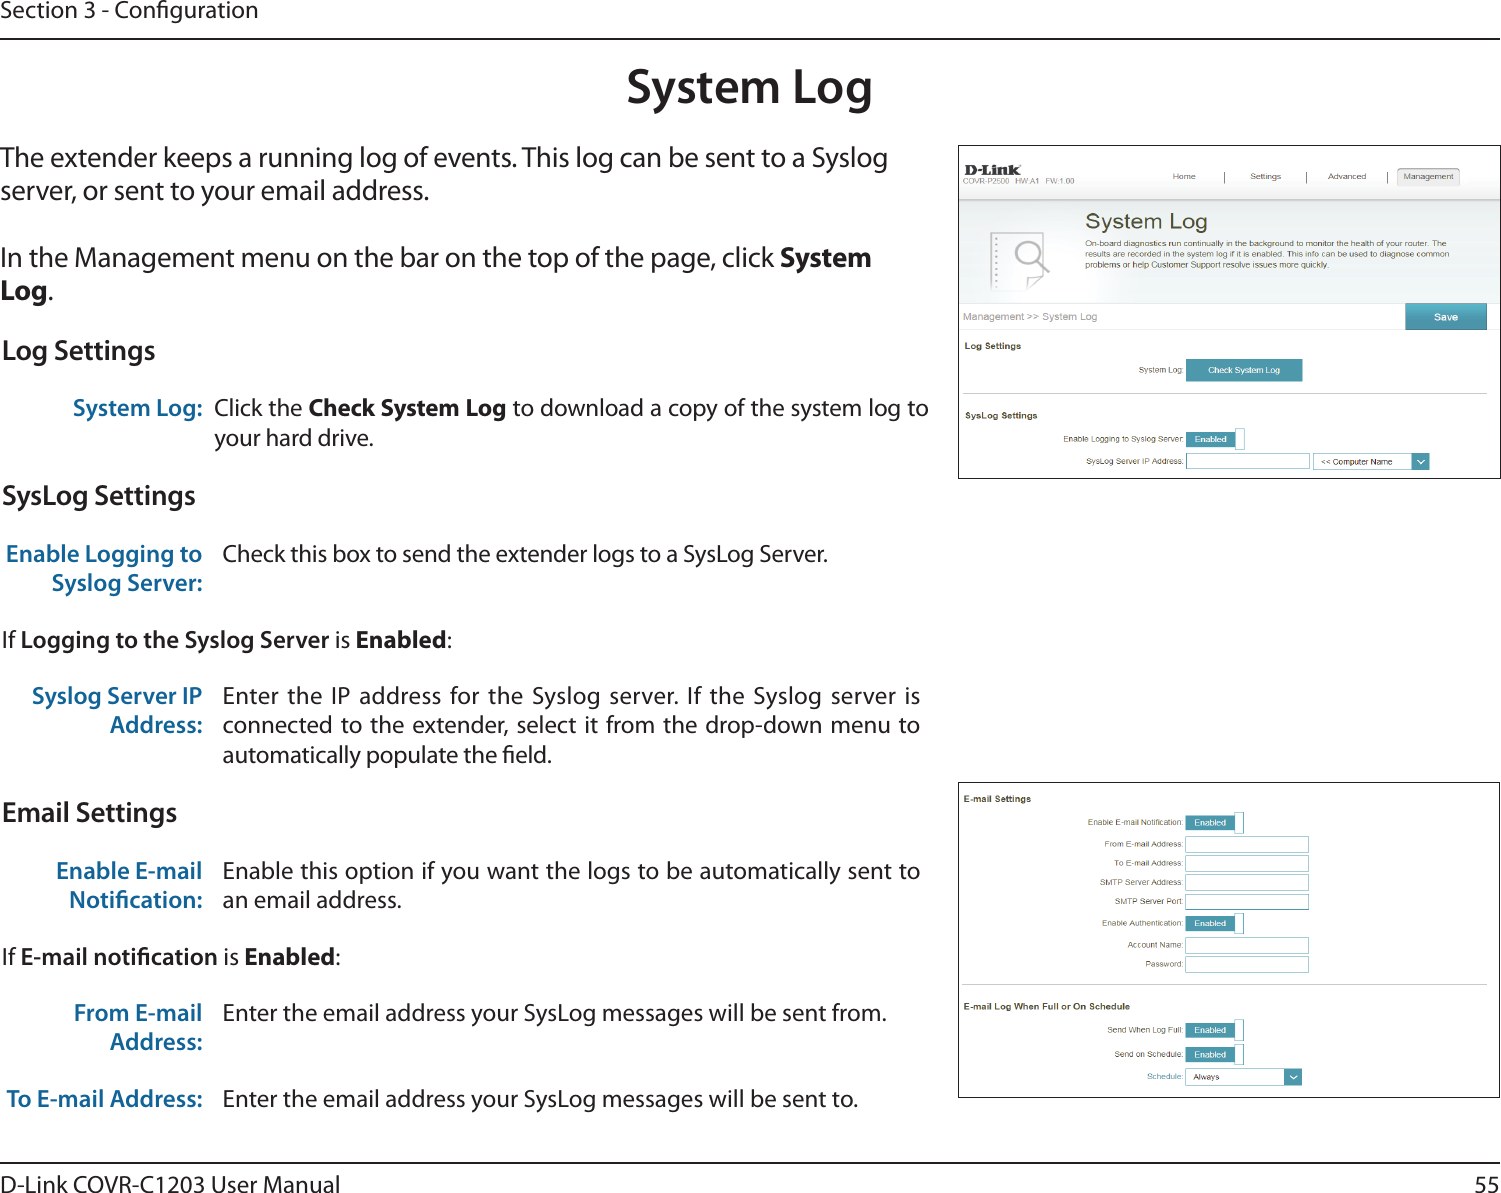 55D-Link COVR-C1203 User ManualSection 3 - CongurationSystem LogThe extender keeps a running log of events. This log can be sent to a Syslog server, or sent to your email address. In the Management menu on the bar on the top of the page, click System Log. Log SettingsSystem Log: Click the Check System Log to download a copy of the system log to your hard drive.SysLog SettingsEnable Logging to Syslog Server:Check this box to send the extender logs to a SysLog Server. If Logging to the Syslog Server is Enabled:Syslog Server IP Address:Enter the IP address for the Syslog server. If the Syslog server is connected to the extender, select it from the drop-down menu to automatically populate the eld. Email SettingsEnable E-mail Notication:Enable this option if you want the logs to be automatically sent to an email address.If E-mail notication is Enabled:From E-mail Address:Enter the email address your SysLog messages will be sent from.To E-mail Address: Enter the email address your SysLog messages will be sent to.